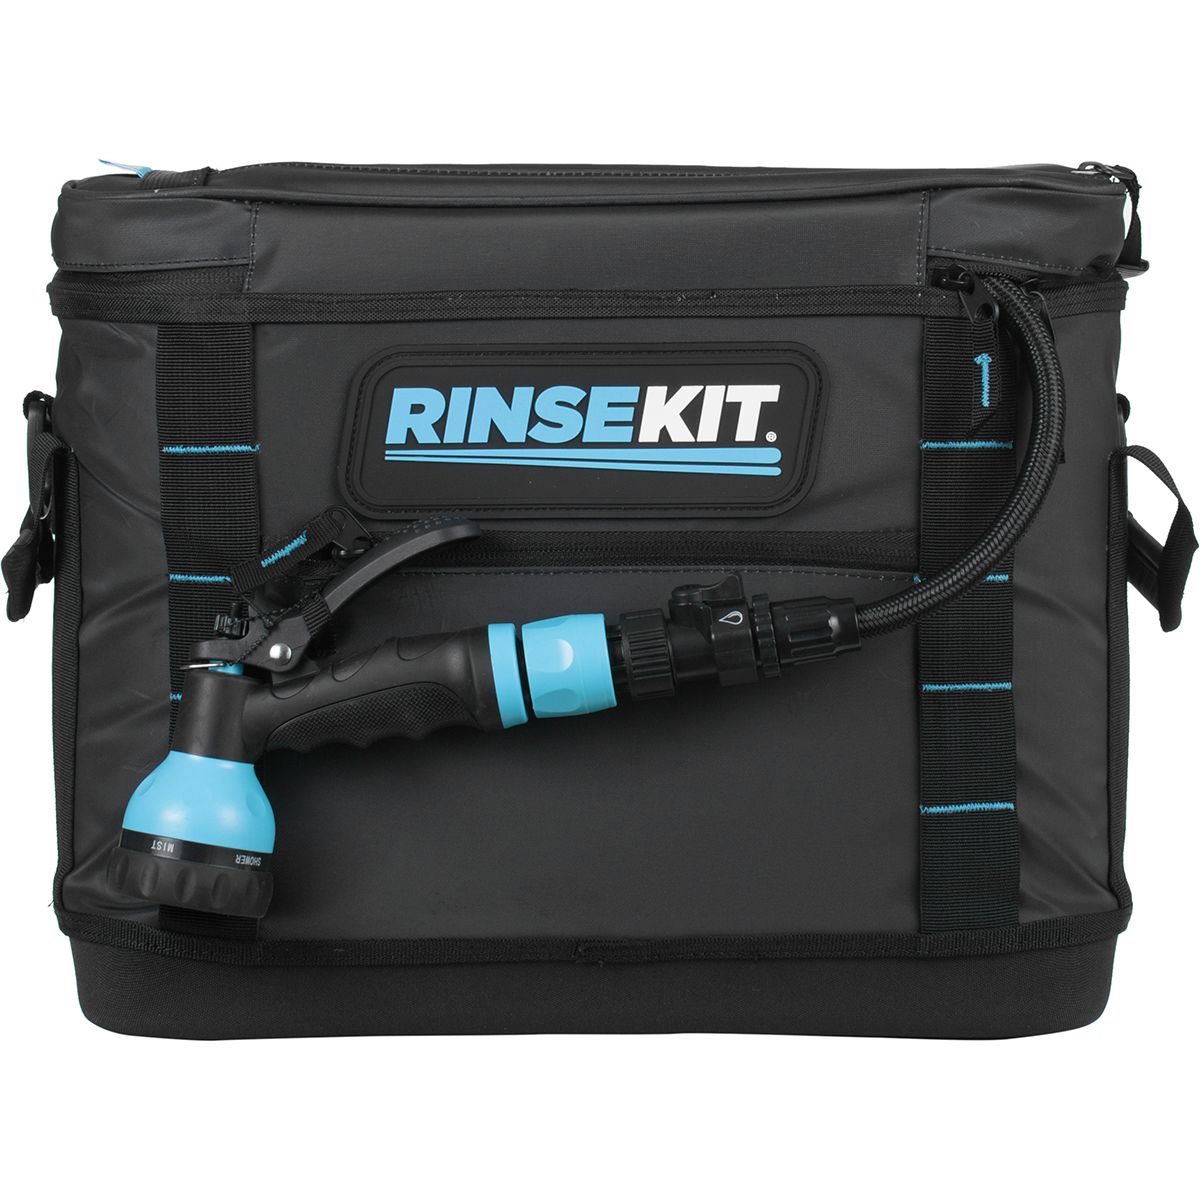 RinseKit Lux Soft Tote Pressurized Portable Shower Hose